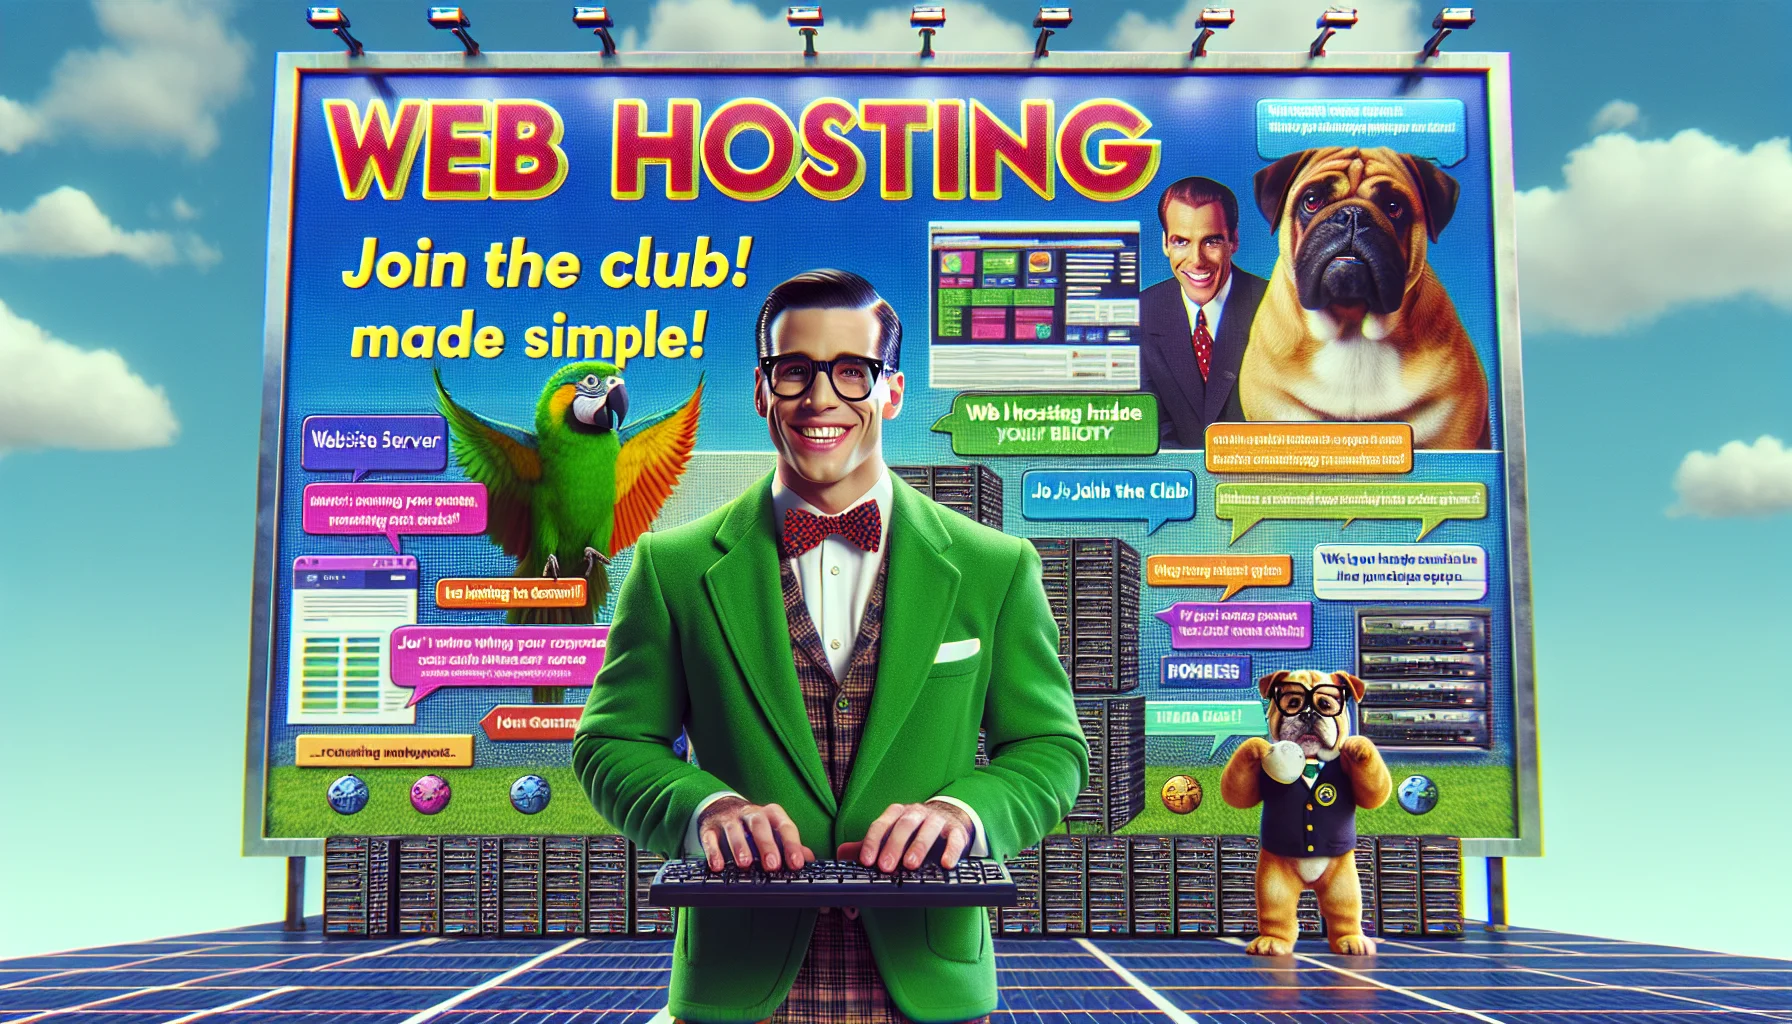 Generate a humorous scene regarding web hosting which portrays an imaginary brand set in a TV commercial environment. Envision a charismatic spokesperson with a radiant smile, wearing a bright green blazer standing against a huge, colorful billboard with catchy phrases like 'Join the Club!' and 'Web Hosting Made Simple!' The backdrop should include website templates, clustered server images, and floating domain names. Features such as a comedic parrot mimicking internet jargon, and a friendly bulldog mascot wearing glasses and a bow tie who's trying to type on a large keyboard, can be added for added humor.